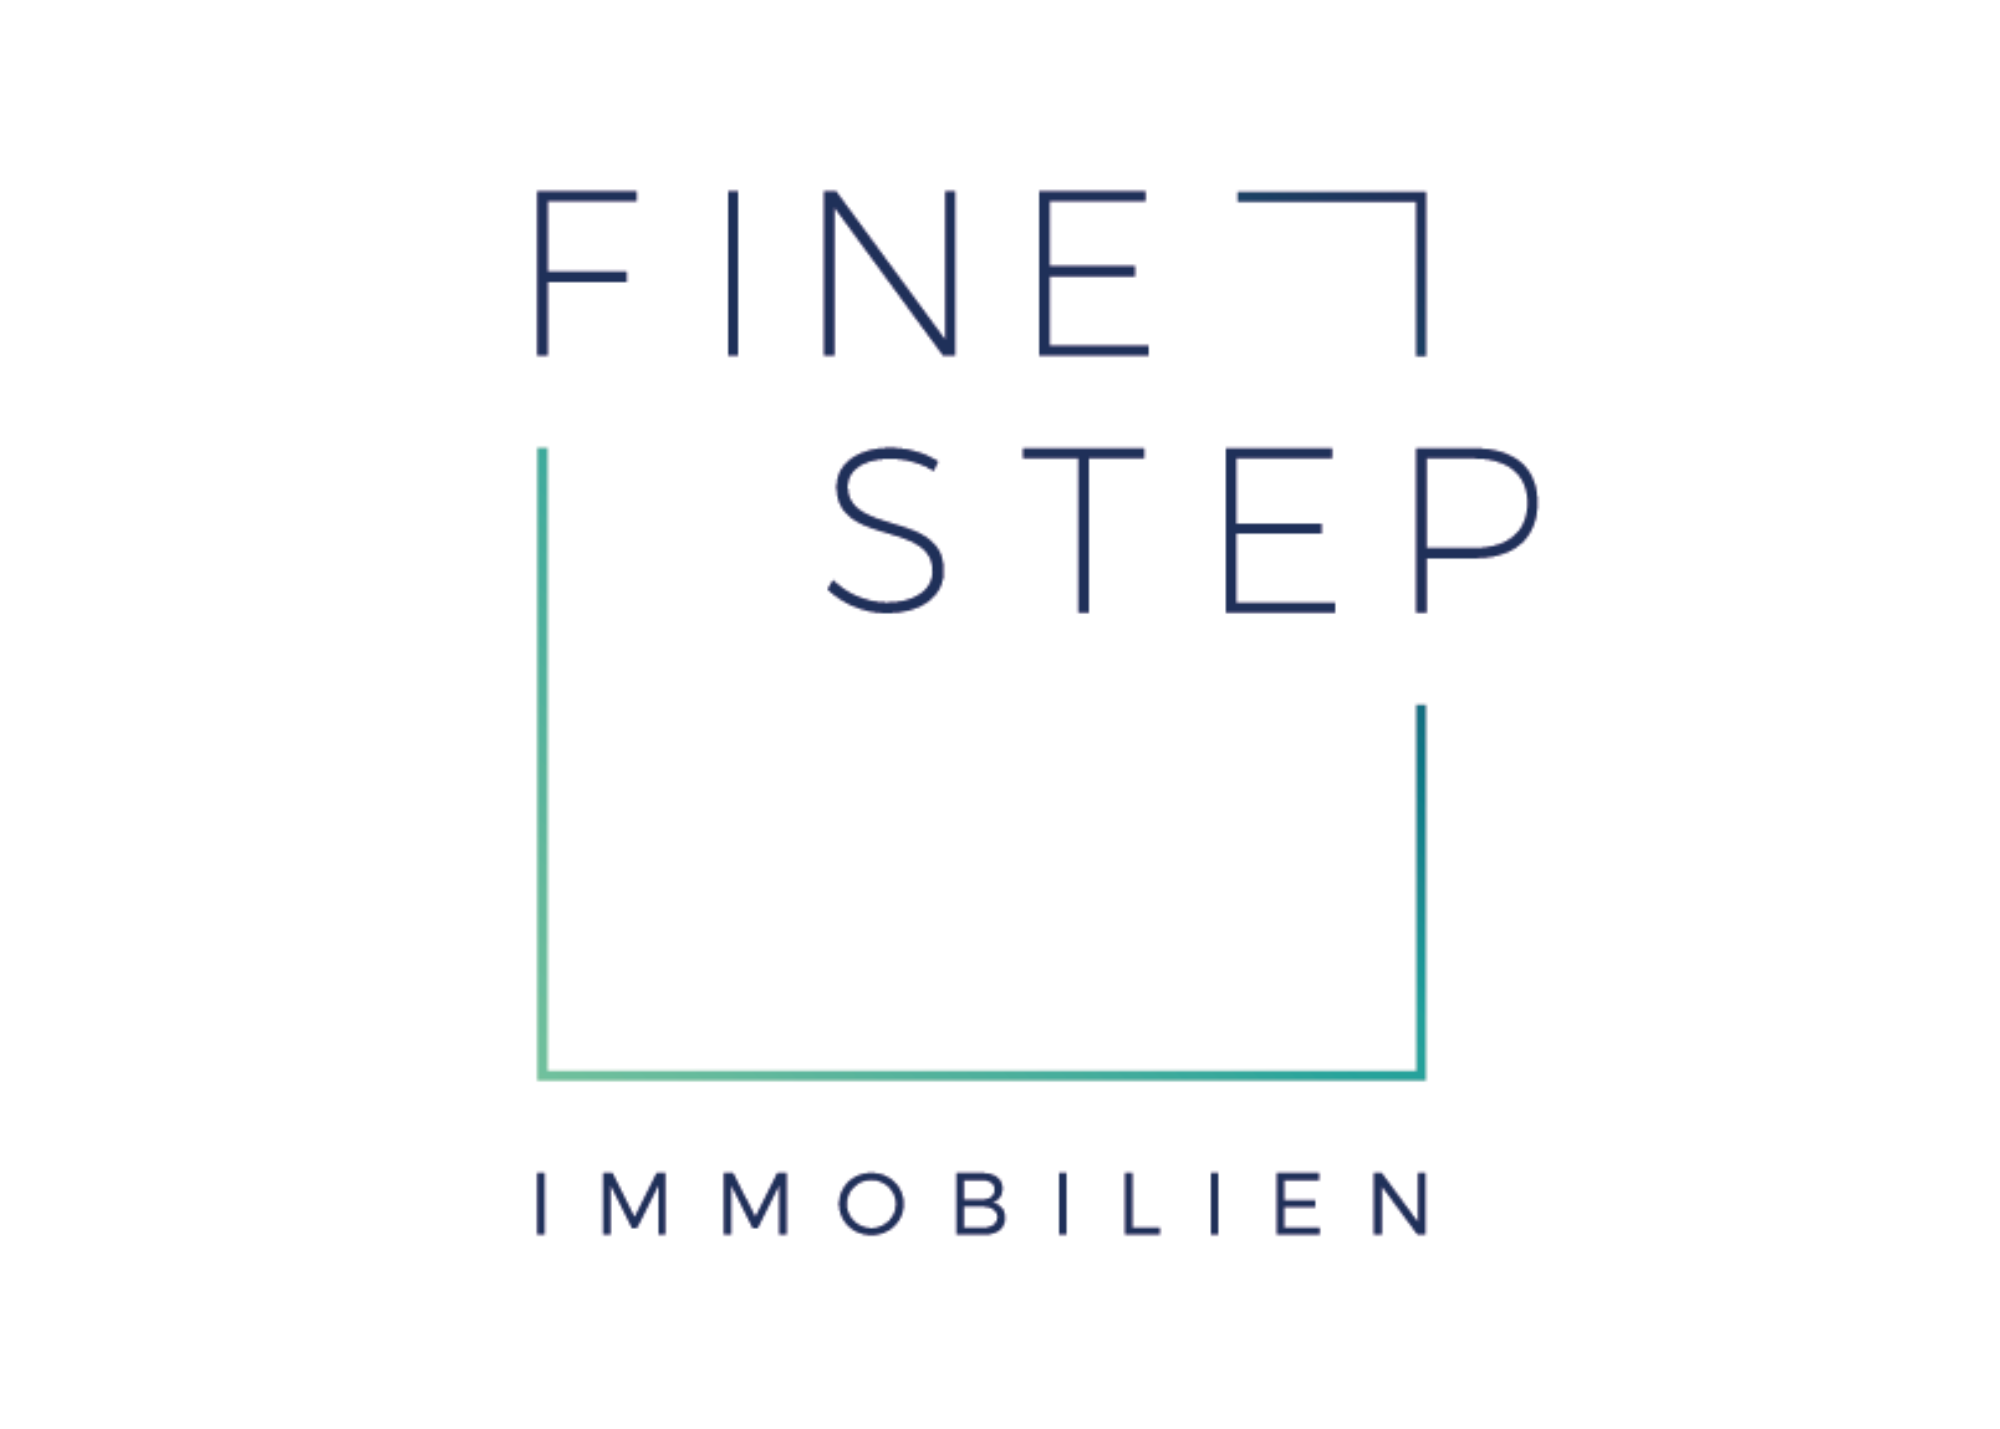 Finestep Immobilien